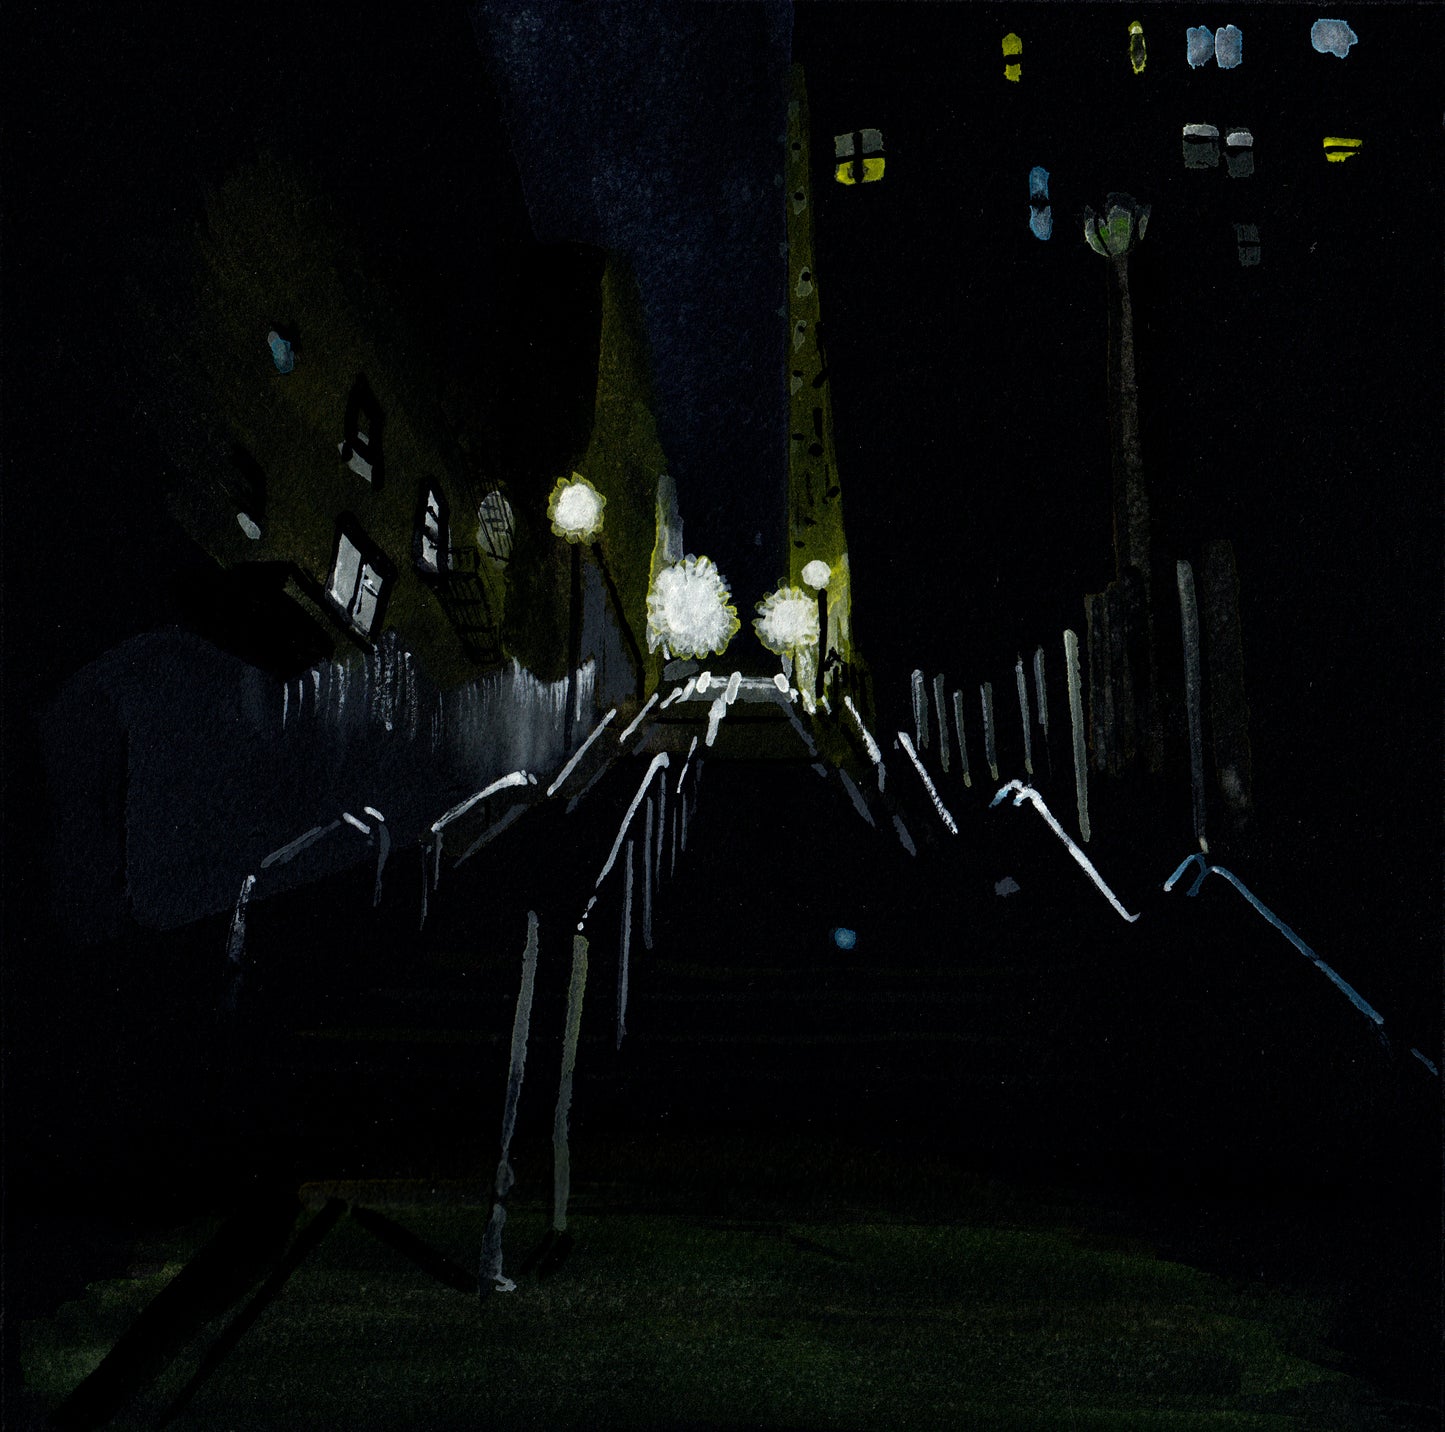 187th Street Stairs at Night, Gouache on Black Paper, Original Painting